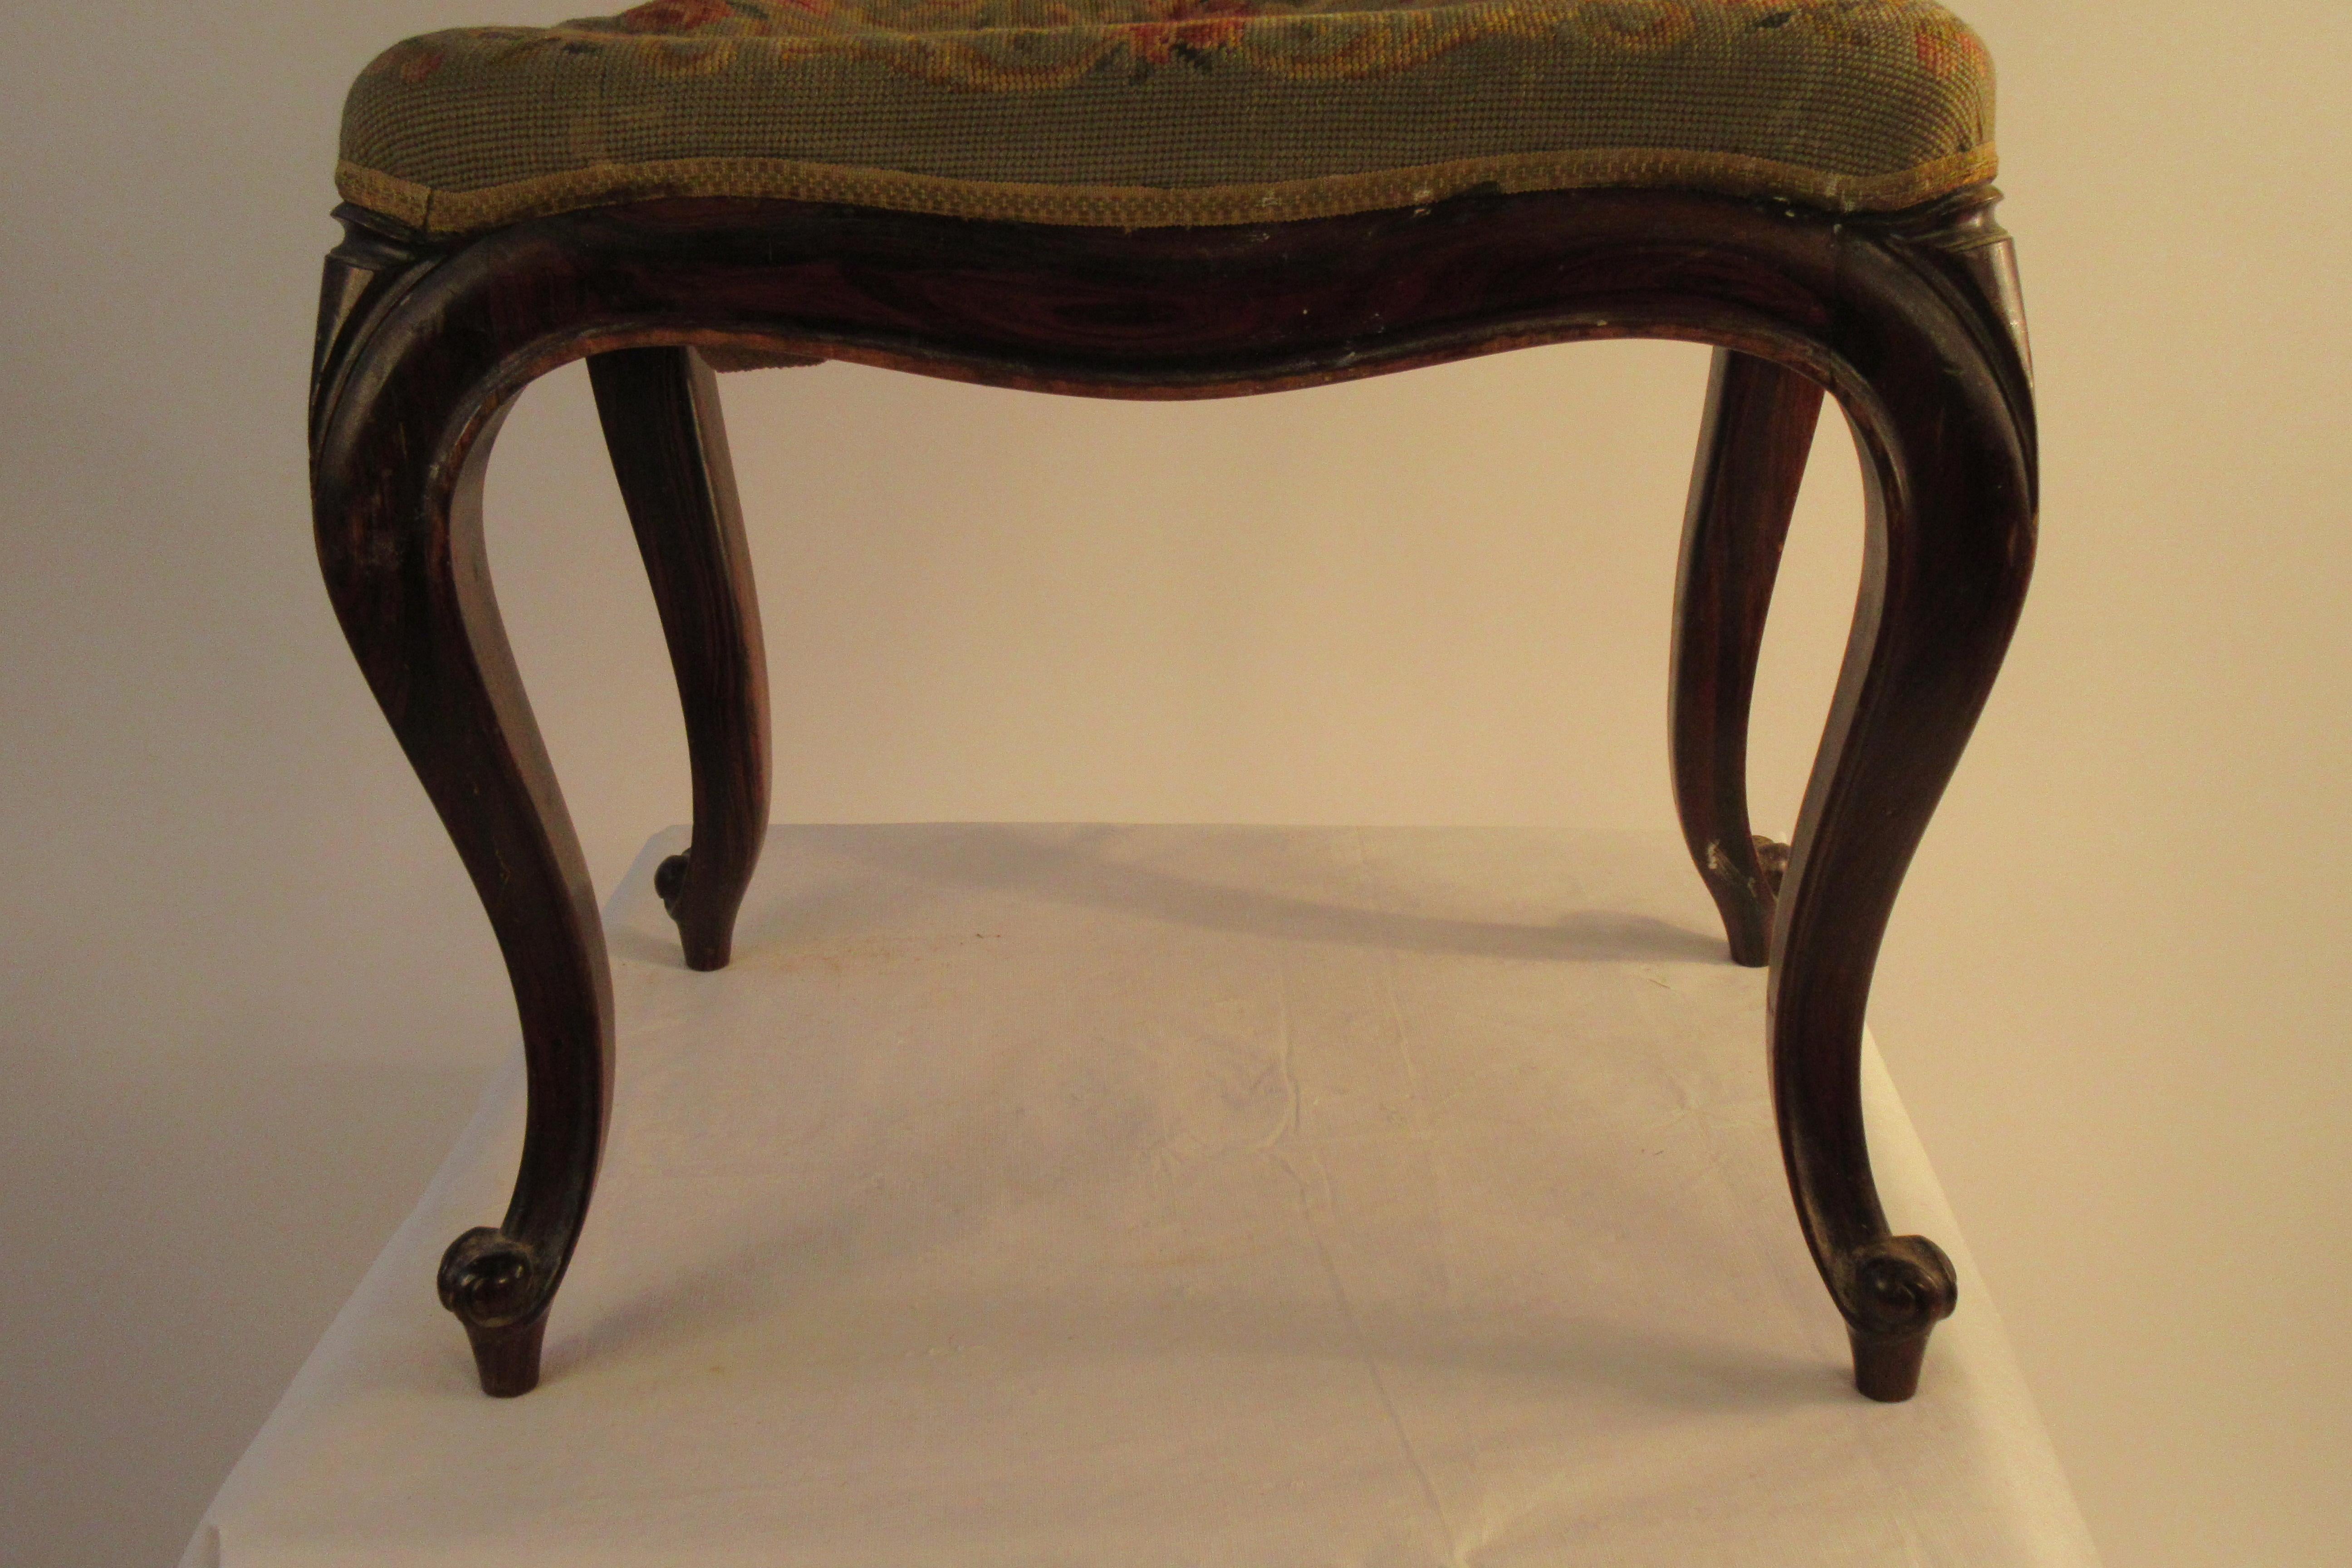 1910 French rosewood footstool with needlepoint seat. Seat needs to reupholstered.